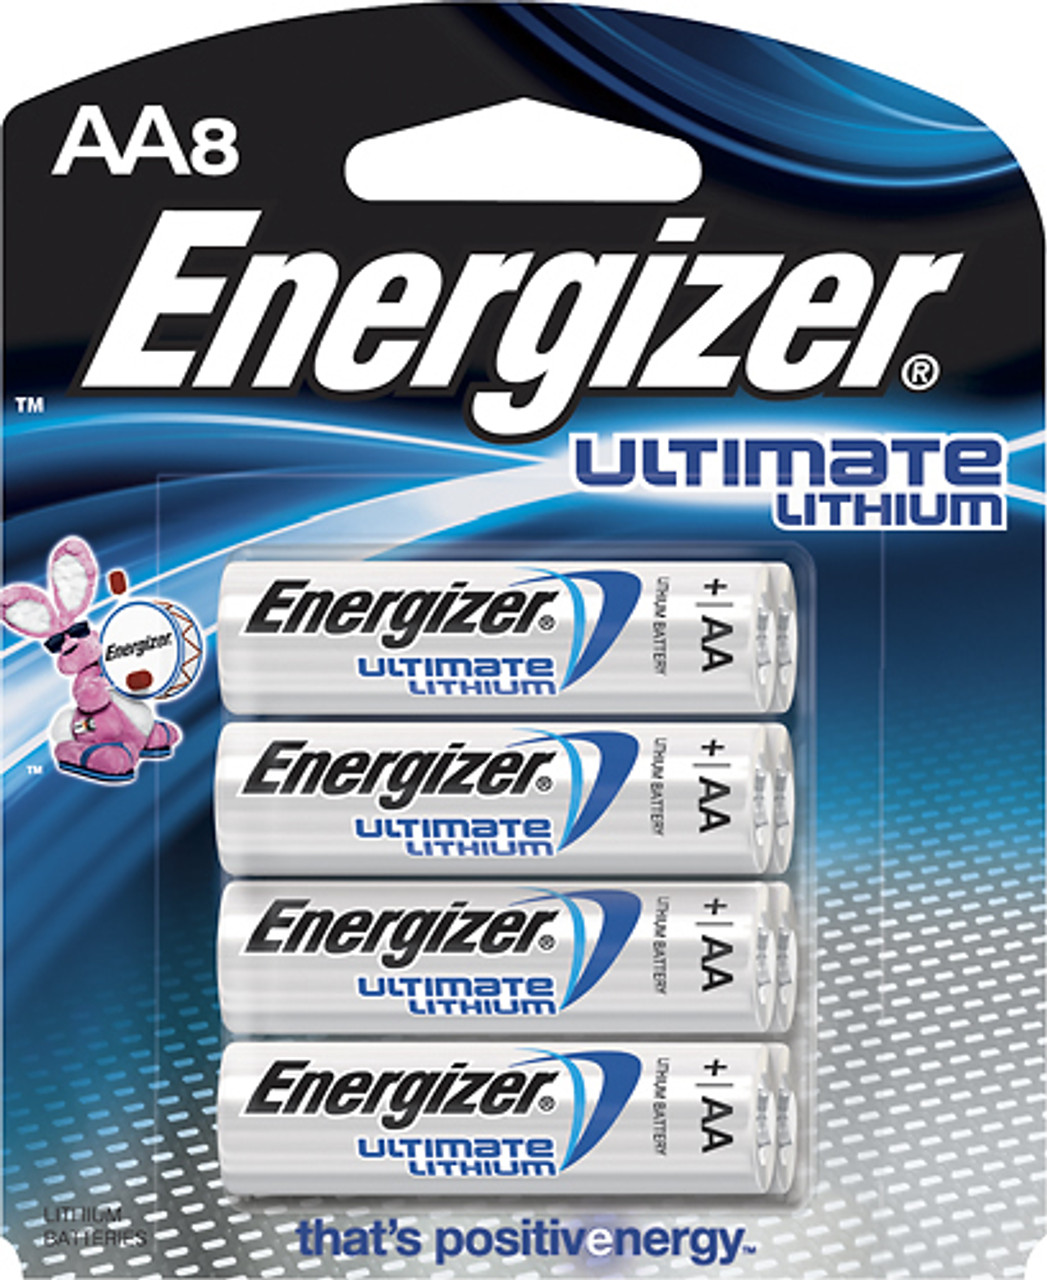 Energizer - Ultimate Lithium AA Batteries (8-Pack)